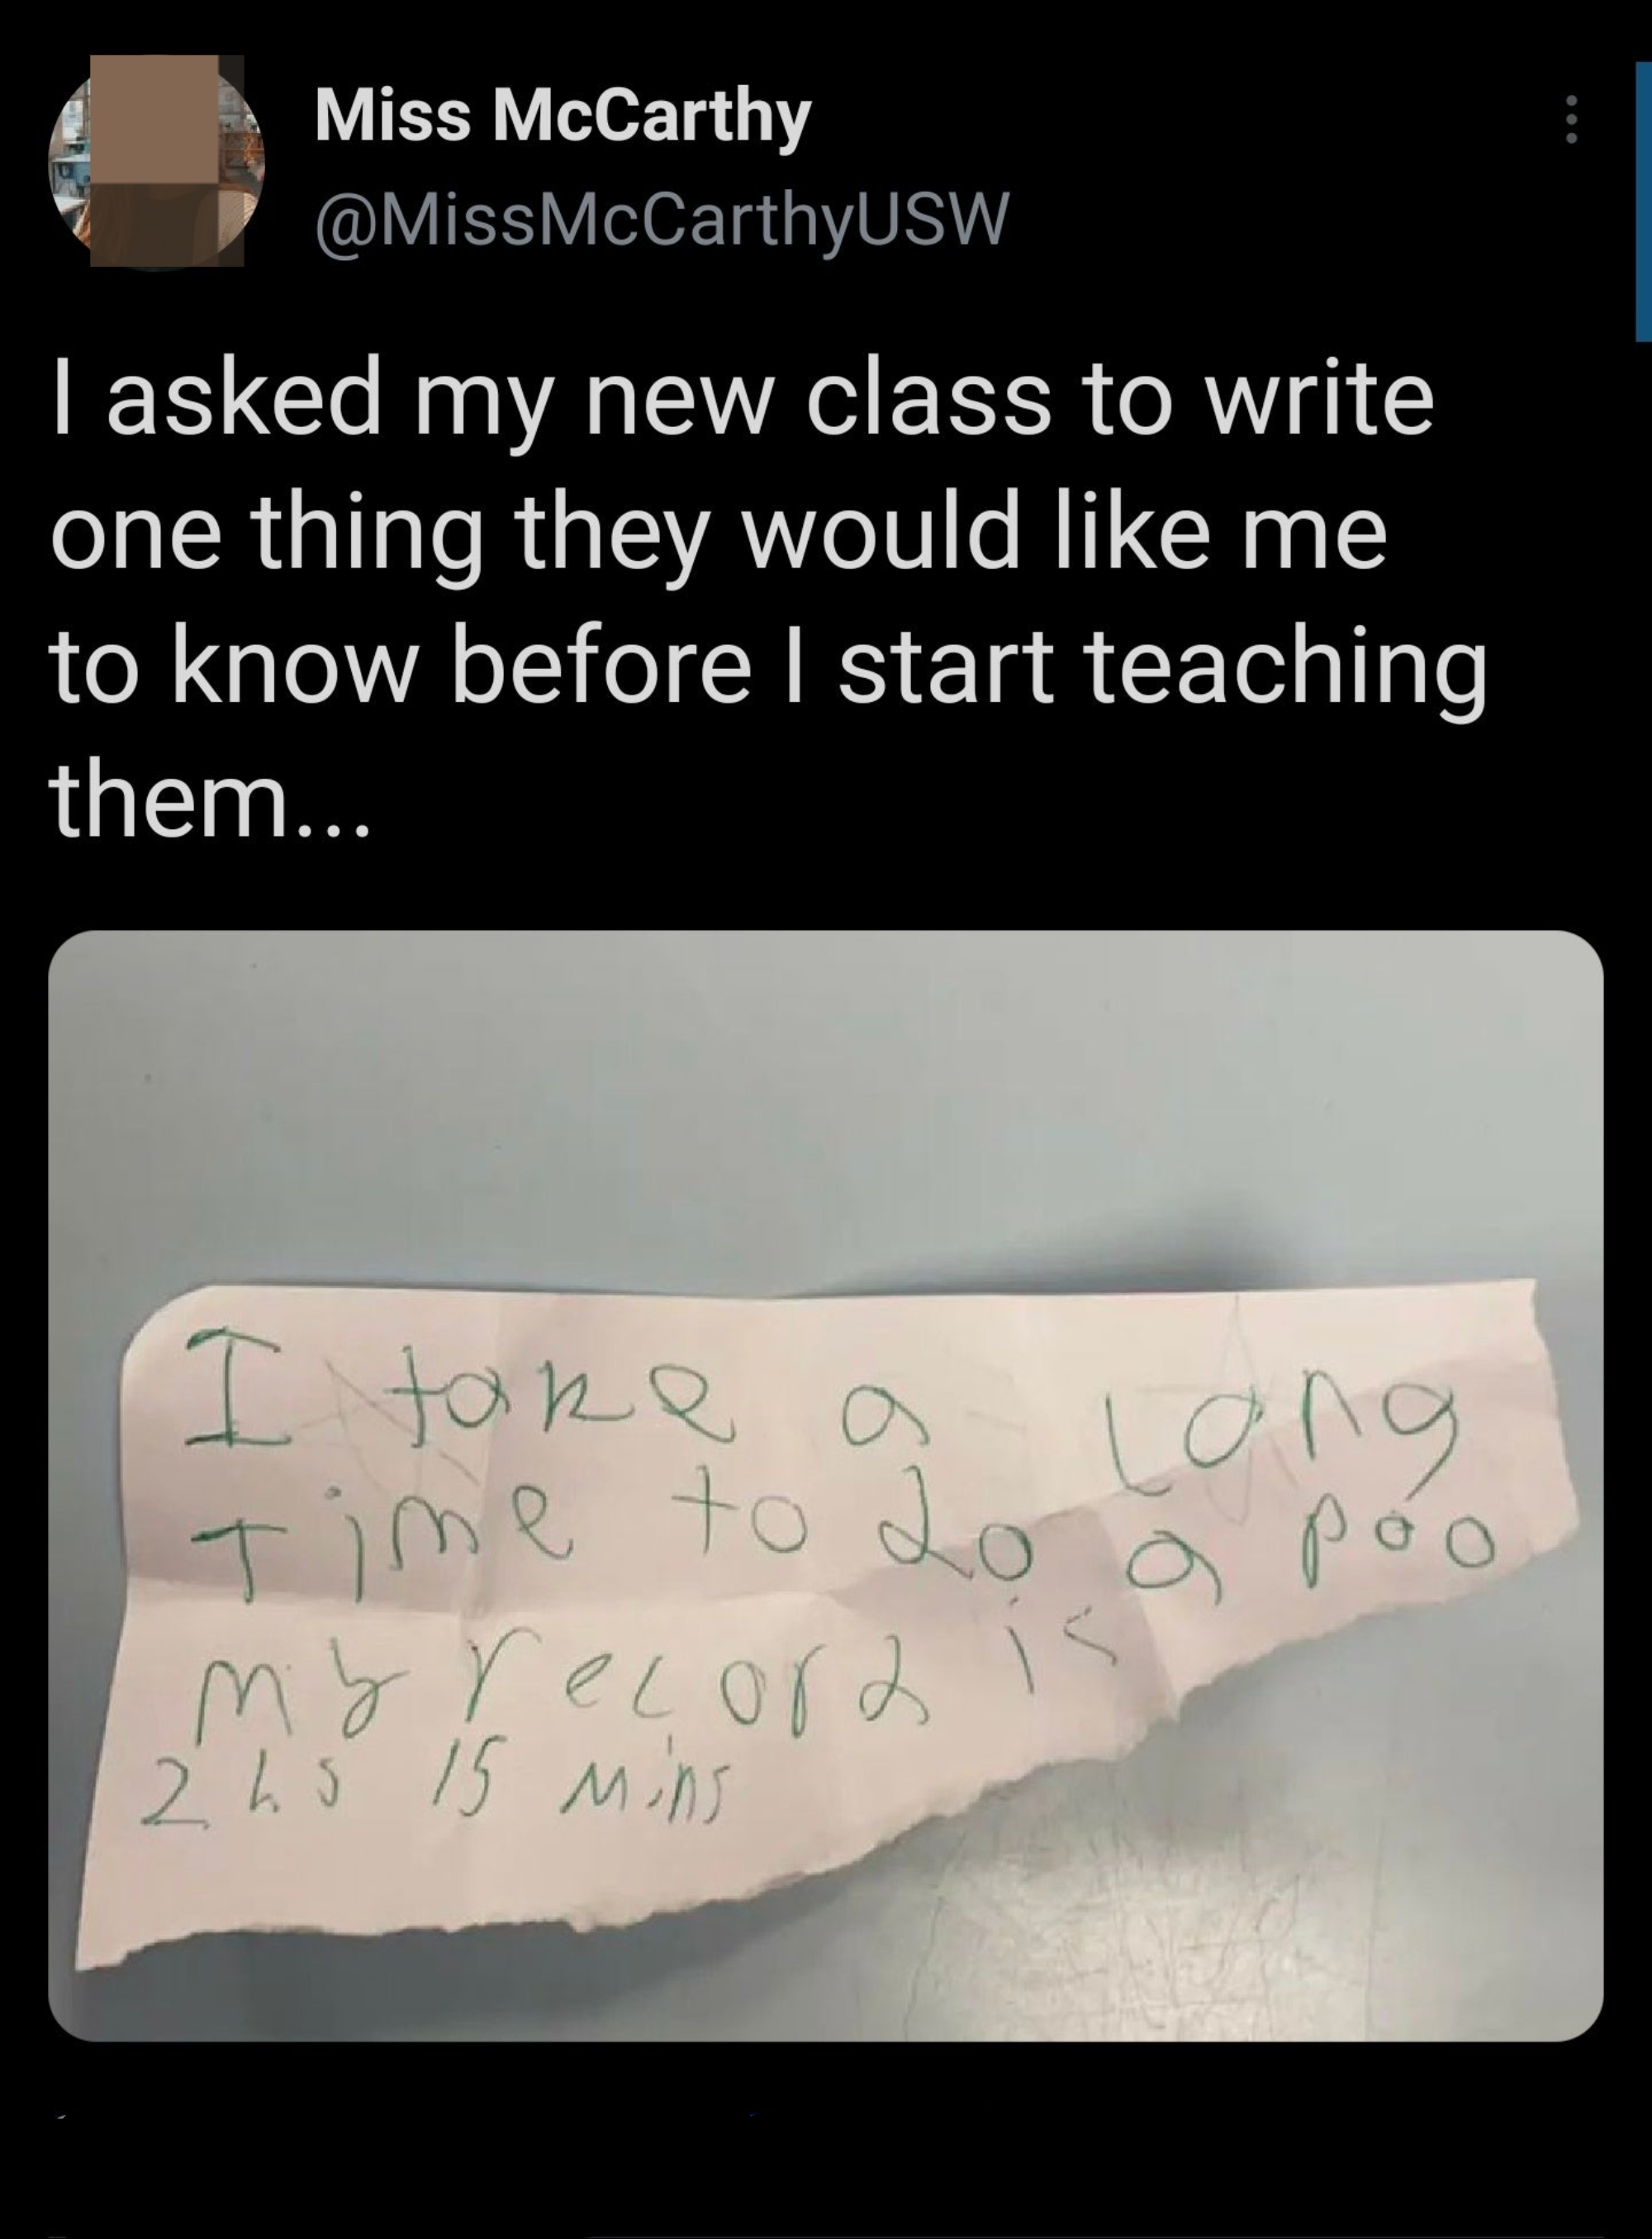 Teacher asked new students to write one thing they wanted her to know before she started teaching them, and got a handwritten note saying &quot;I take a long time to do a poo, my record is 2 hrs 15 mins&quot;